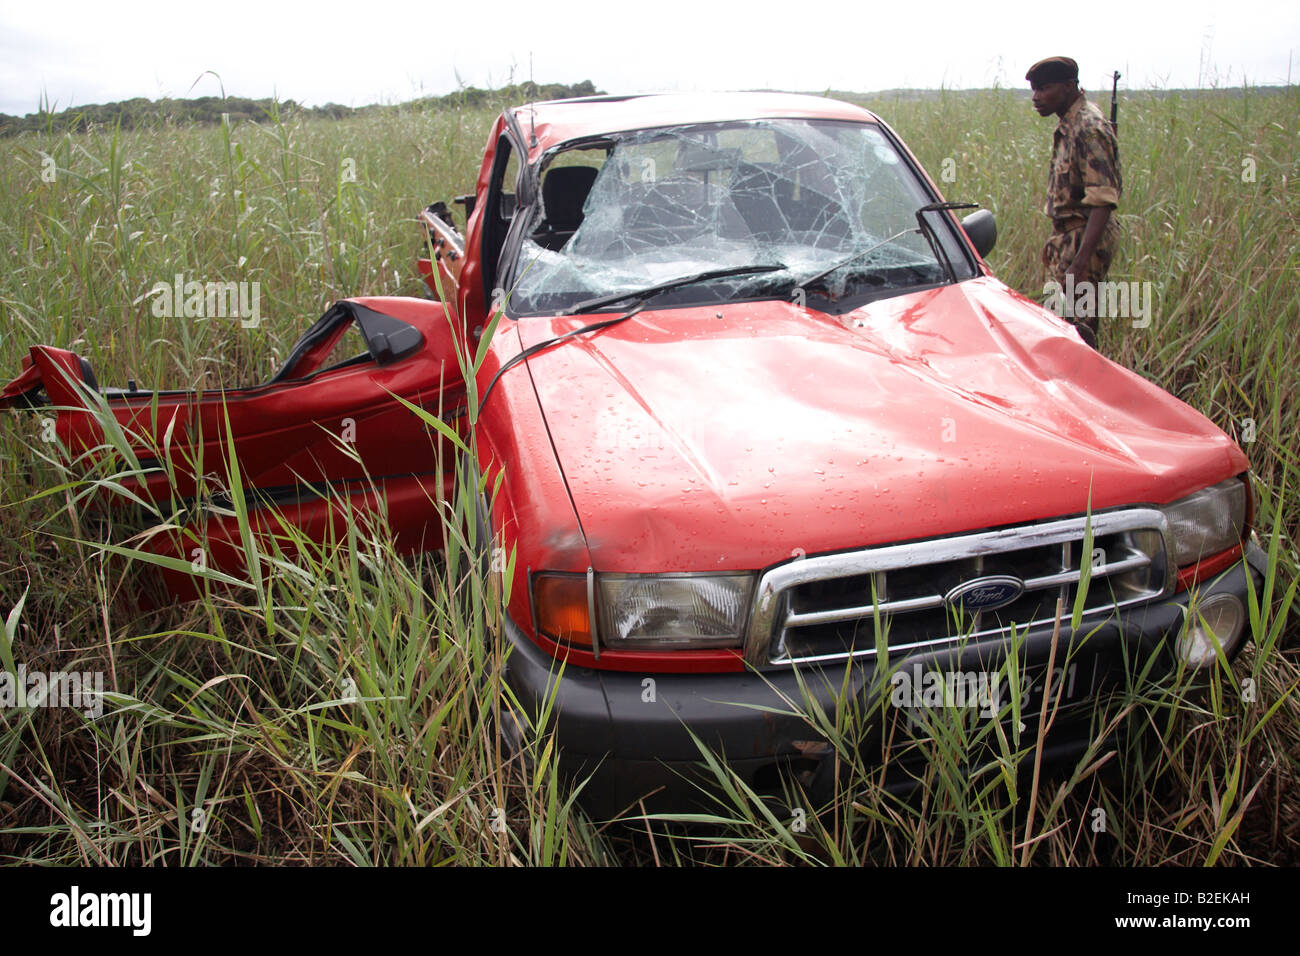 Ranger looking at a vehicle damaged by an Elephant attack Stock Photo